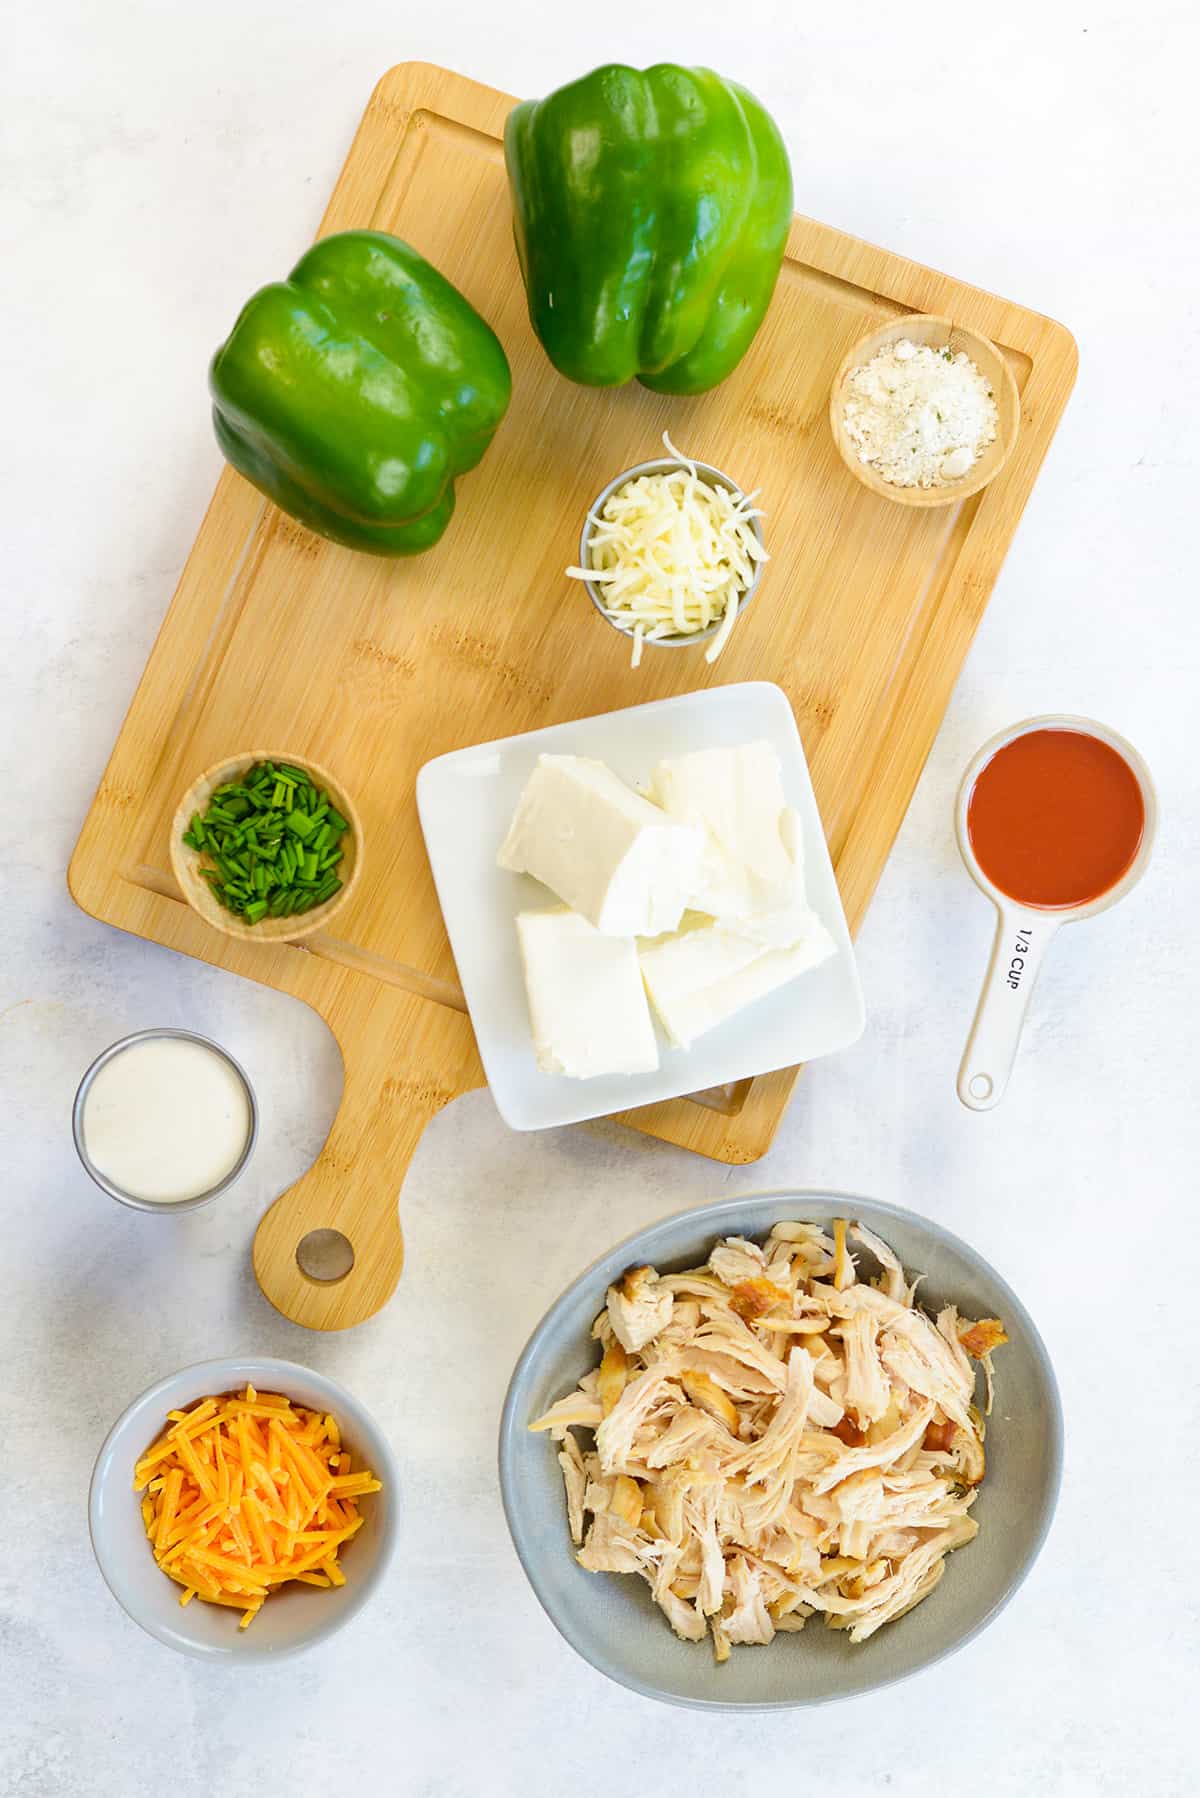 Ingredients for buffalo chicken stuffed peppers recipe.